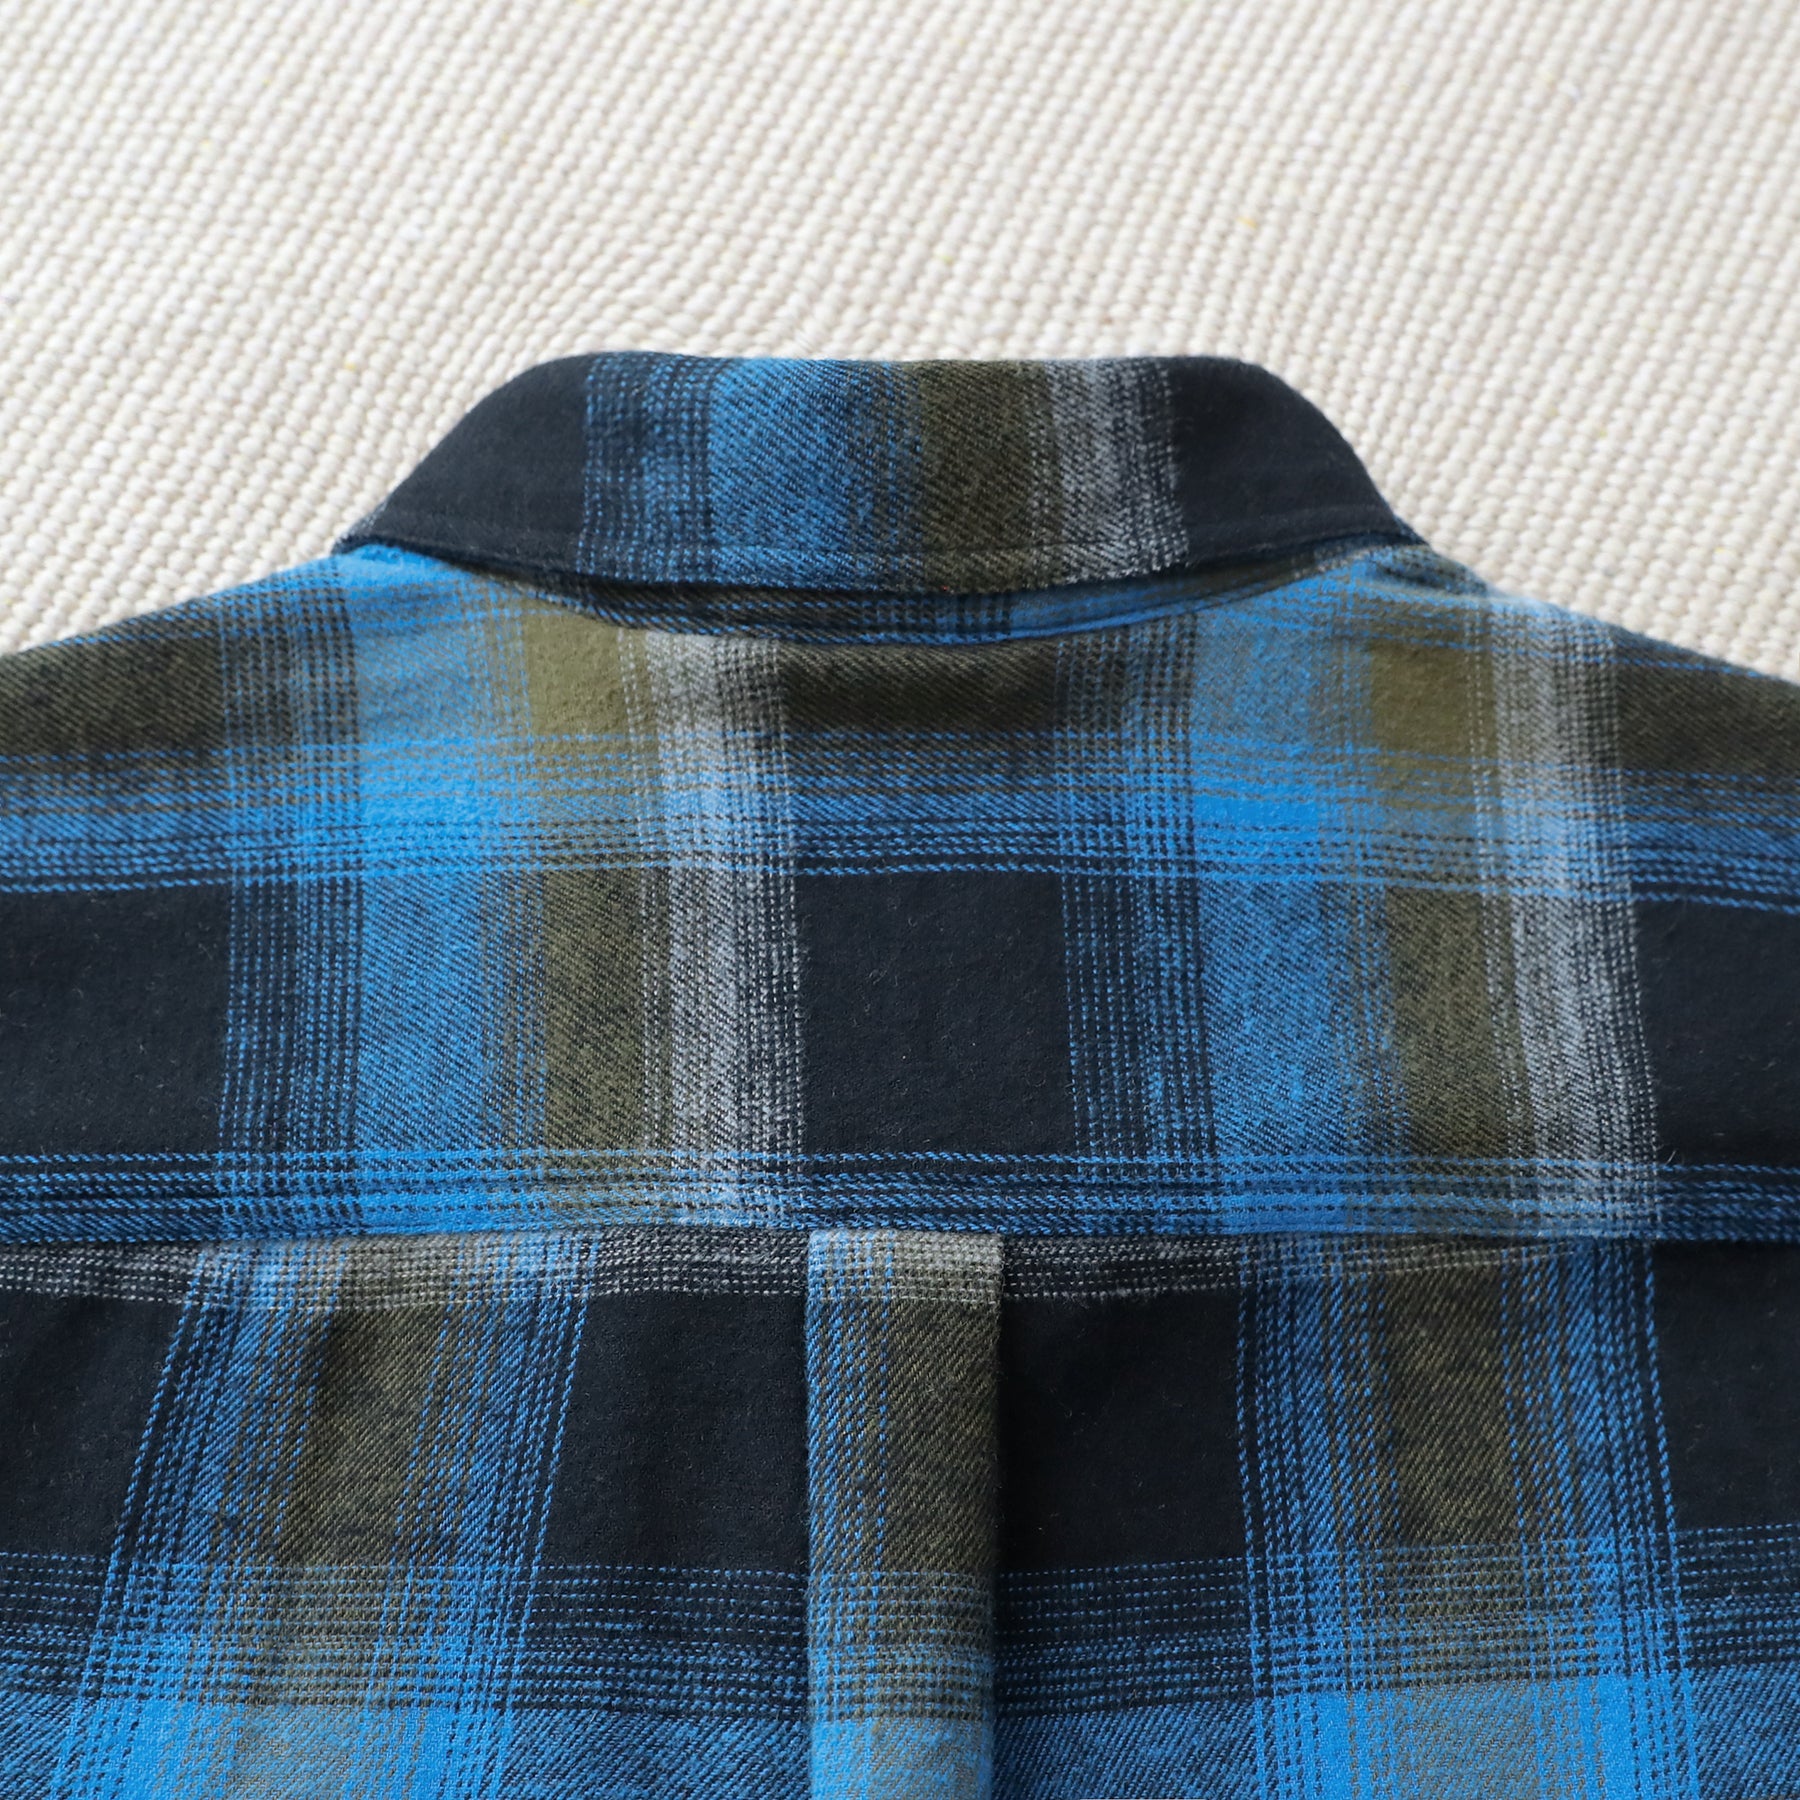 Mens Flannel Shirts Long Sleeve Casual #1008